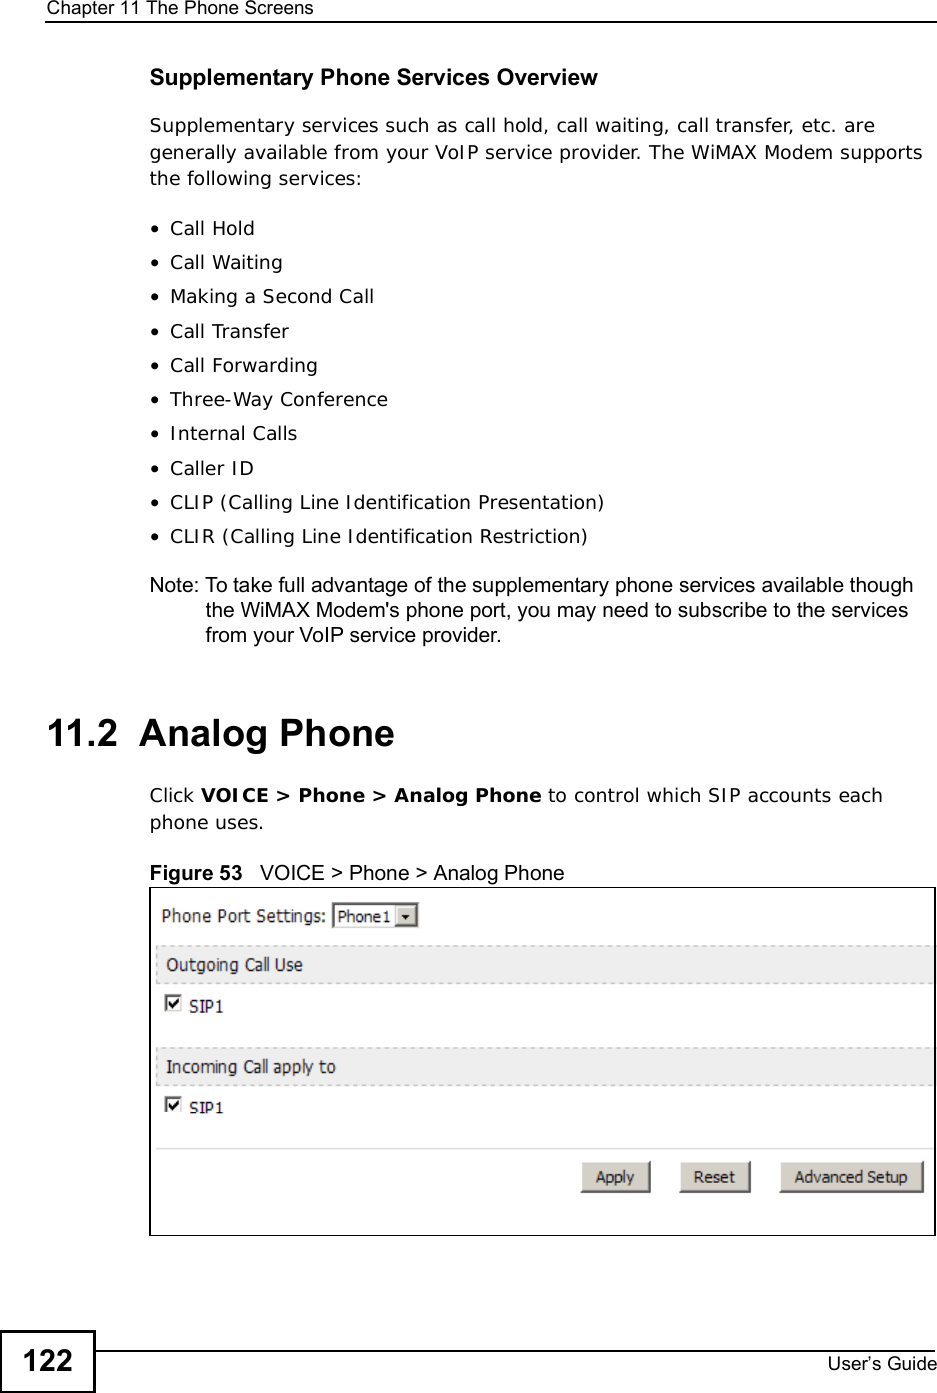 Chapter 11The Phone ScreensUser s Guide122Supplementary Phone Services OverviewSupplementary services such as call hold, call waiting, call transfer, etc. are generally available from your VoIP service provider. The WiMAX Modem supports the following services:•Call Hold•Call Waiting•Making a Second Call•Call Transfer•Call Forwarding•Three-Way Conference•Internal Calls•Caller ID•CLIP (Calling Line Identification Presentation)•CLIR (Calling Line Identification Restriction)Note: To take full advantage of the supplementary phone services available though the WiMAX Modem&apos;s phone port, you may need to subscribe to the services from your VoIP service provider.11.2  Analog PhoneClick VOICE &gt; Phone &gt; Analog Phone to control which SIP accounts each phone uses.Figure 53   VOICE &gt; Phone &gt; Analog Phone